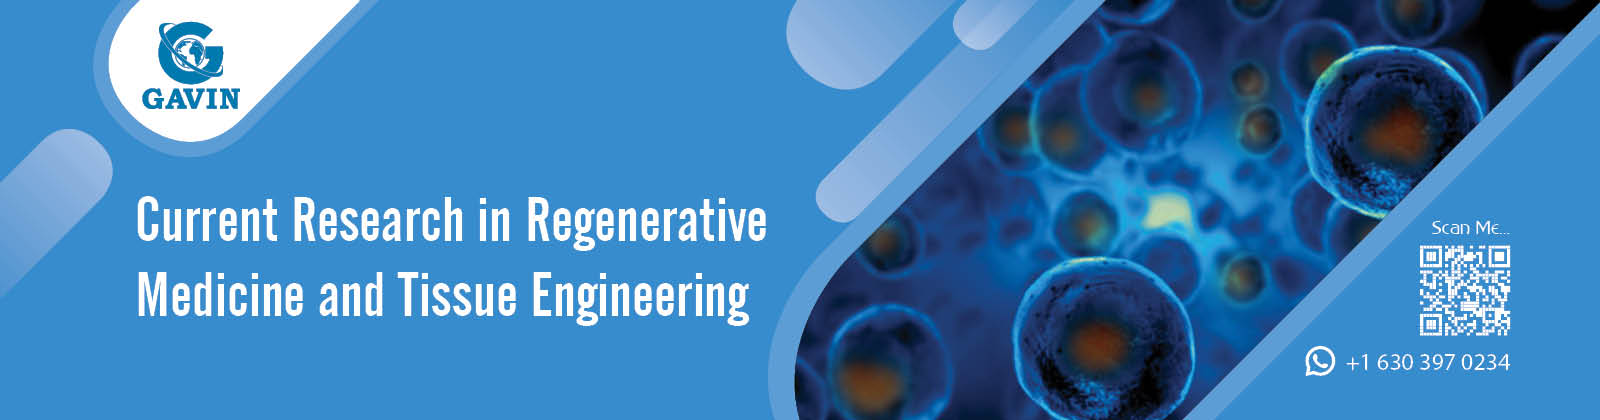 Current Research in Regenerative Medicine and Tissue Engineering